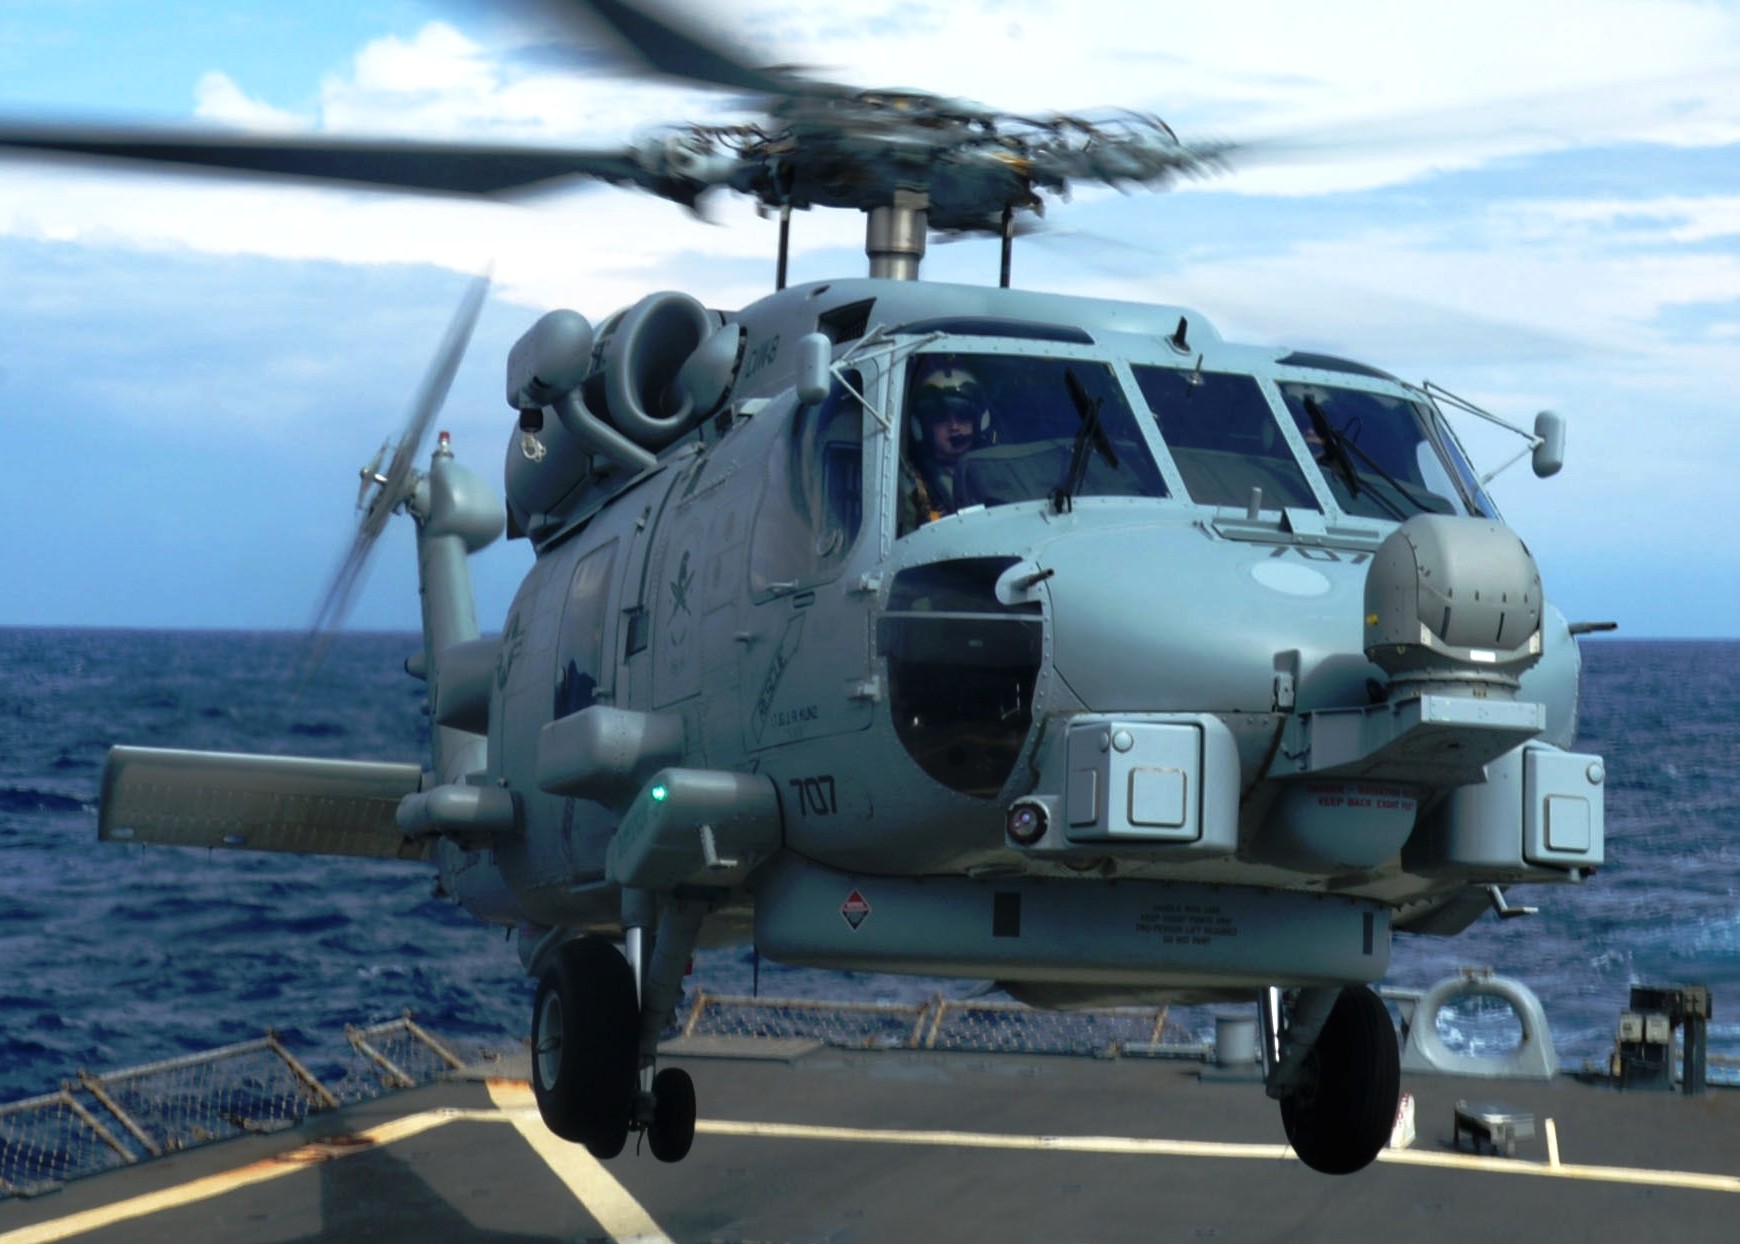 hsm-70 spartans helicopter maritime strike squadron mh-60r seahawk 2014 27